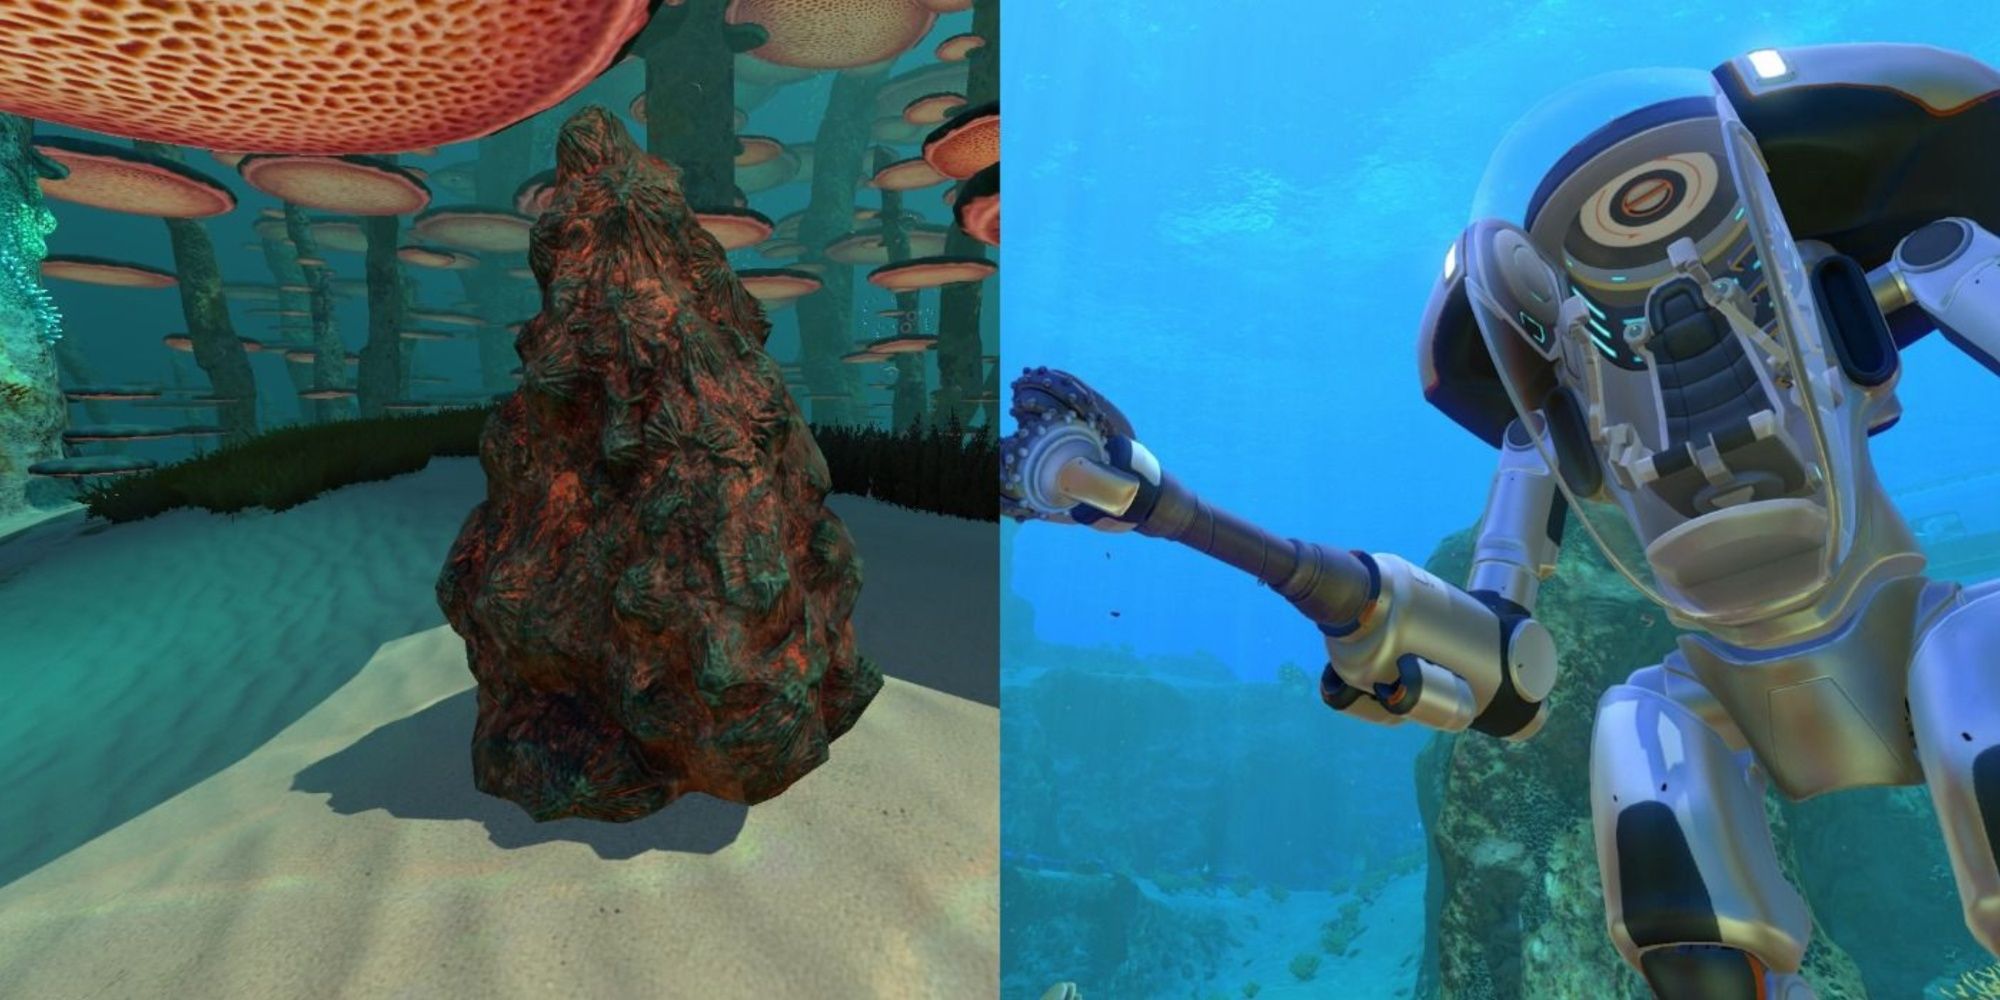 Subnautica - a large resource deposit and a prawn suit